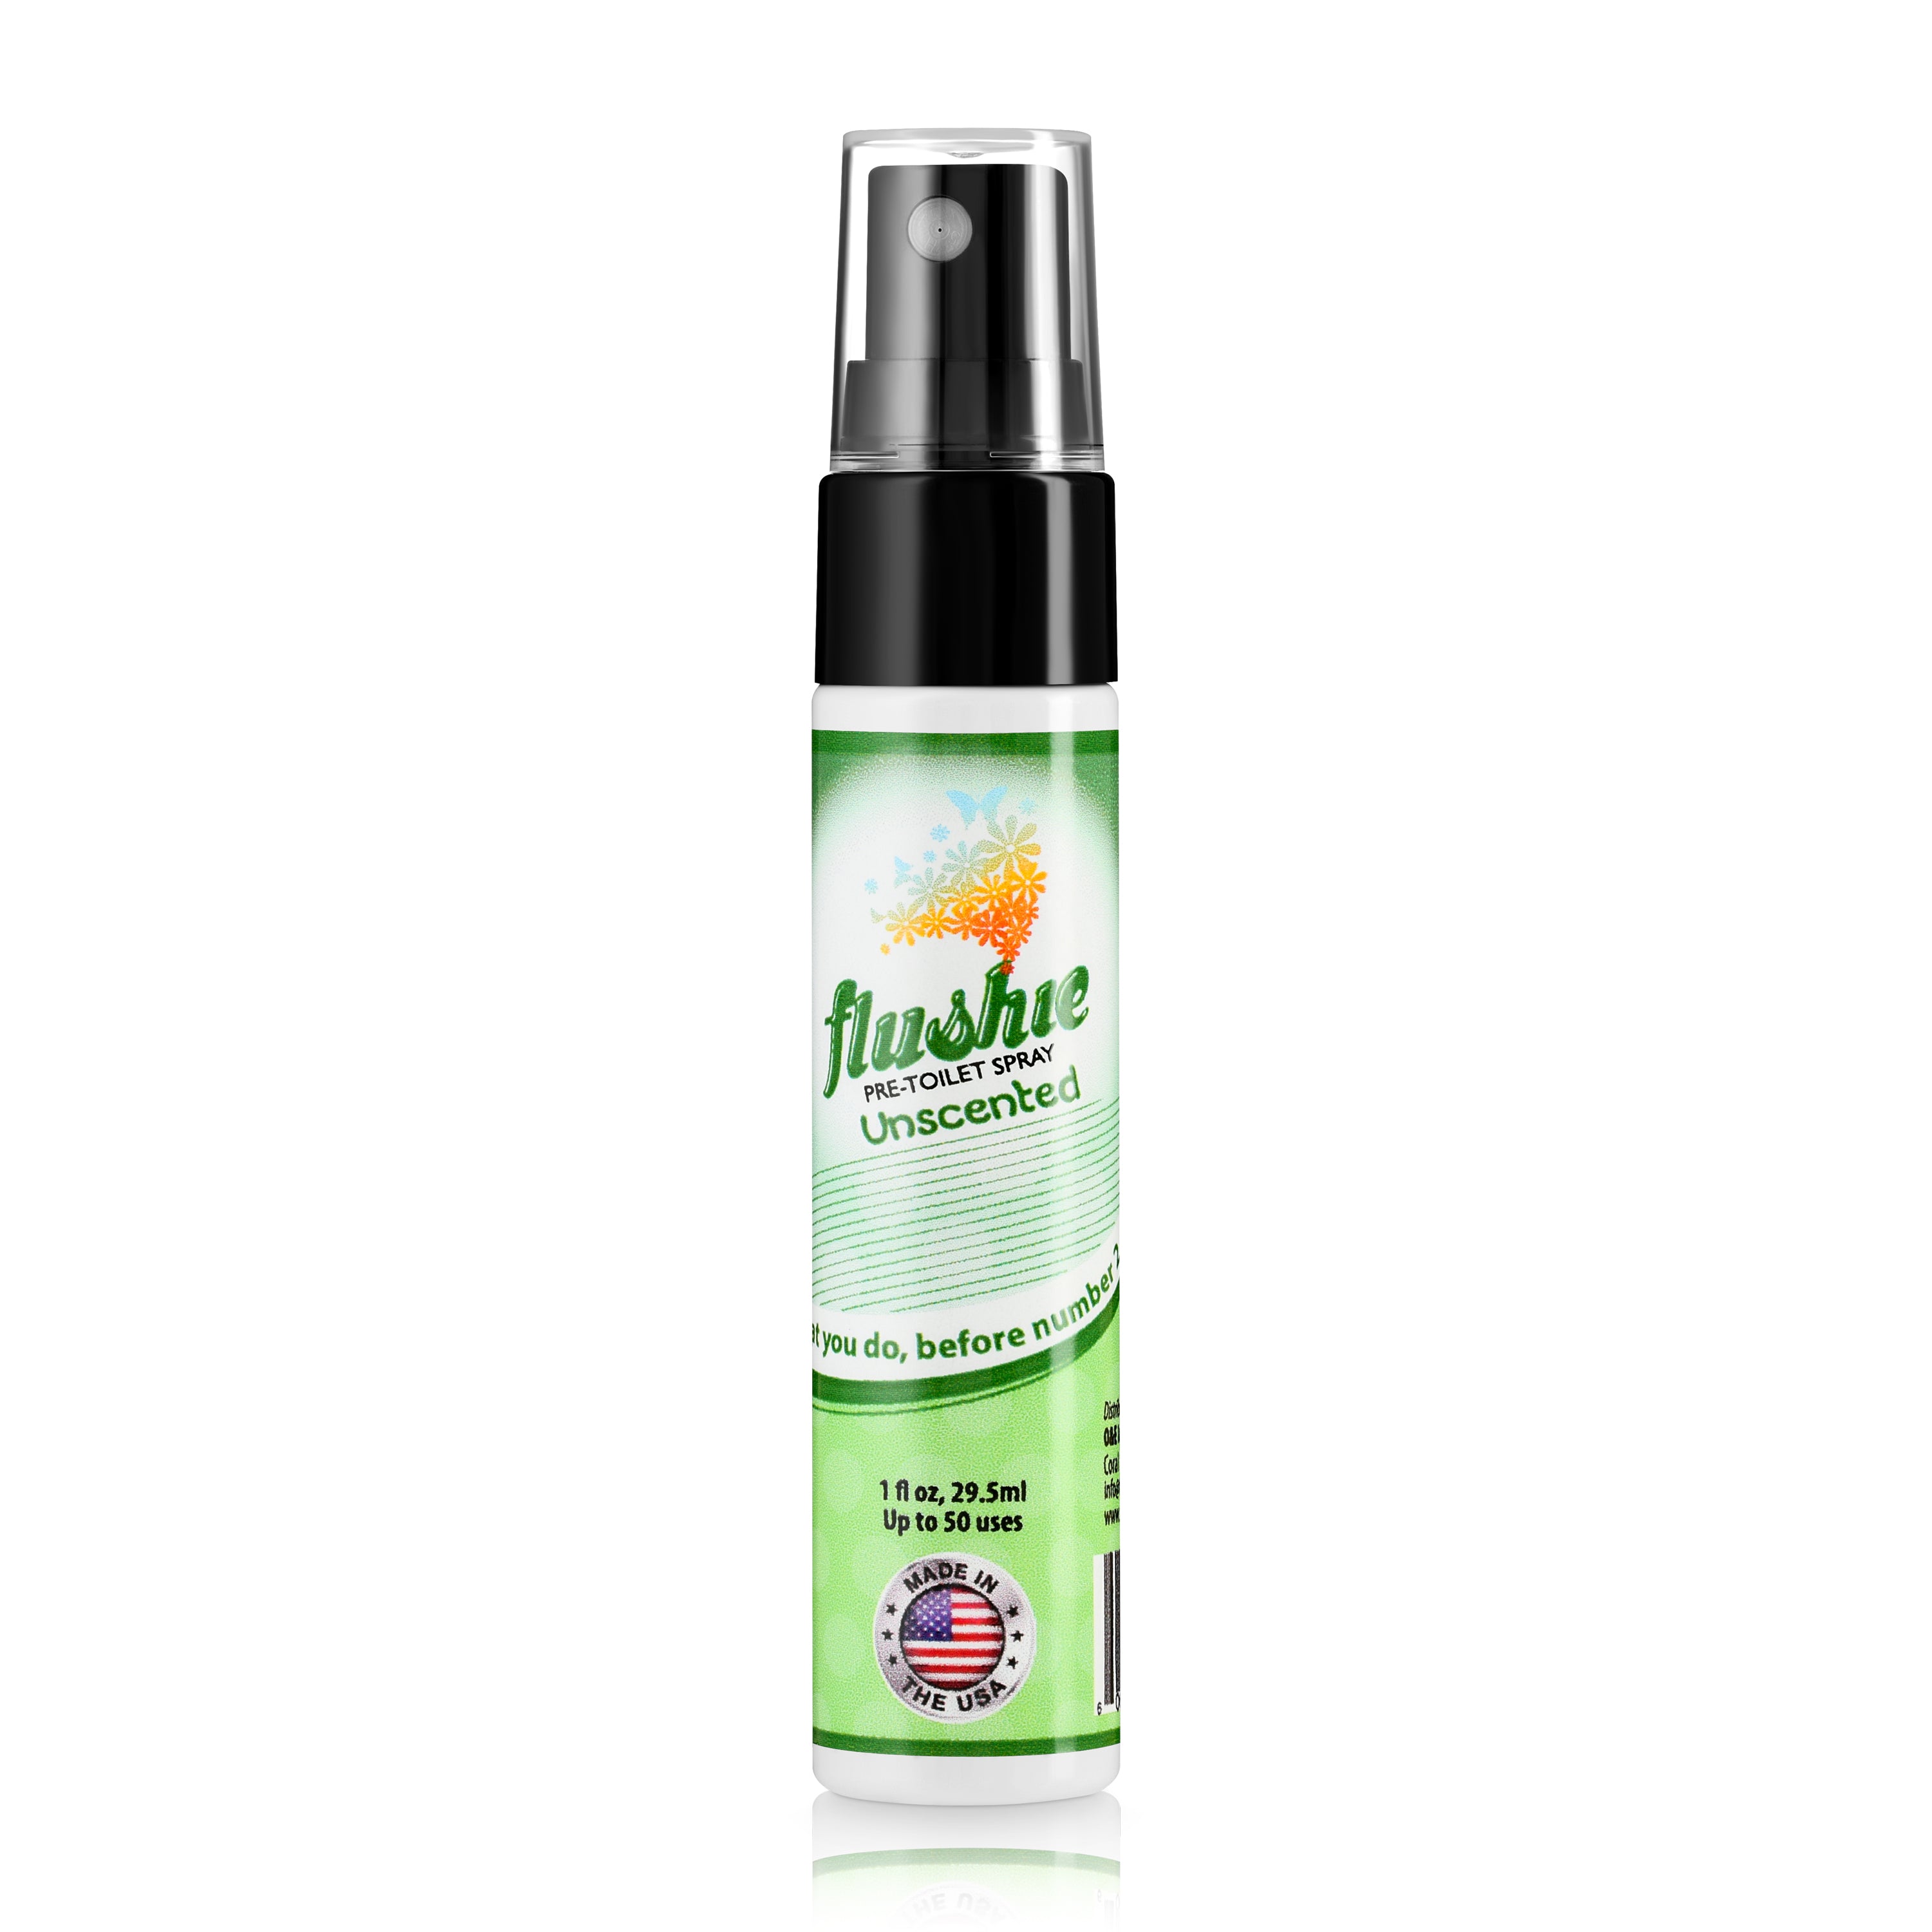 Unscented Travel Size Pre-Toilet Spray